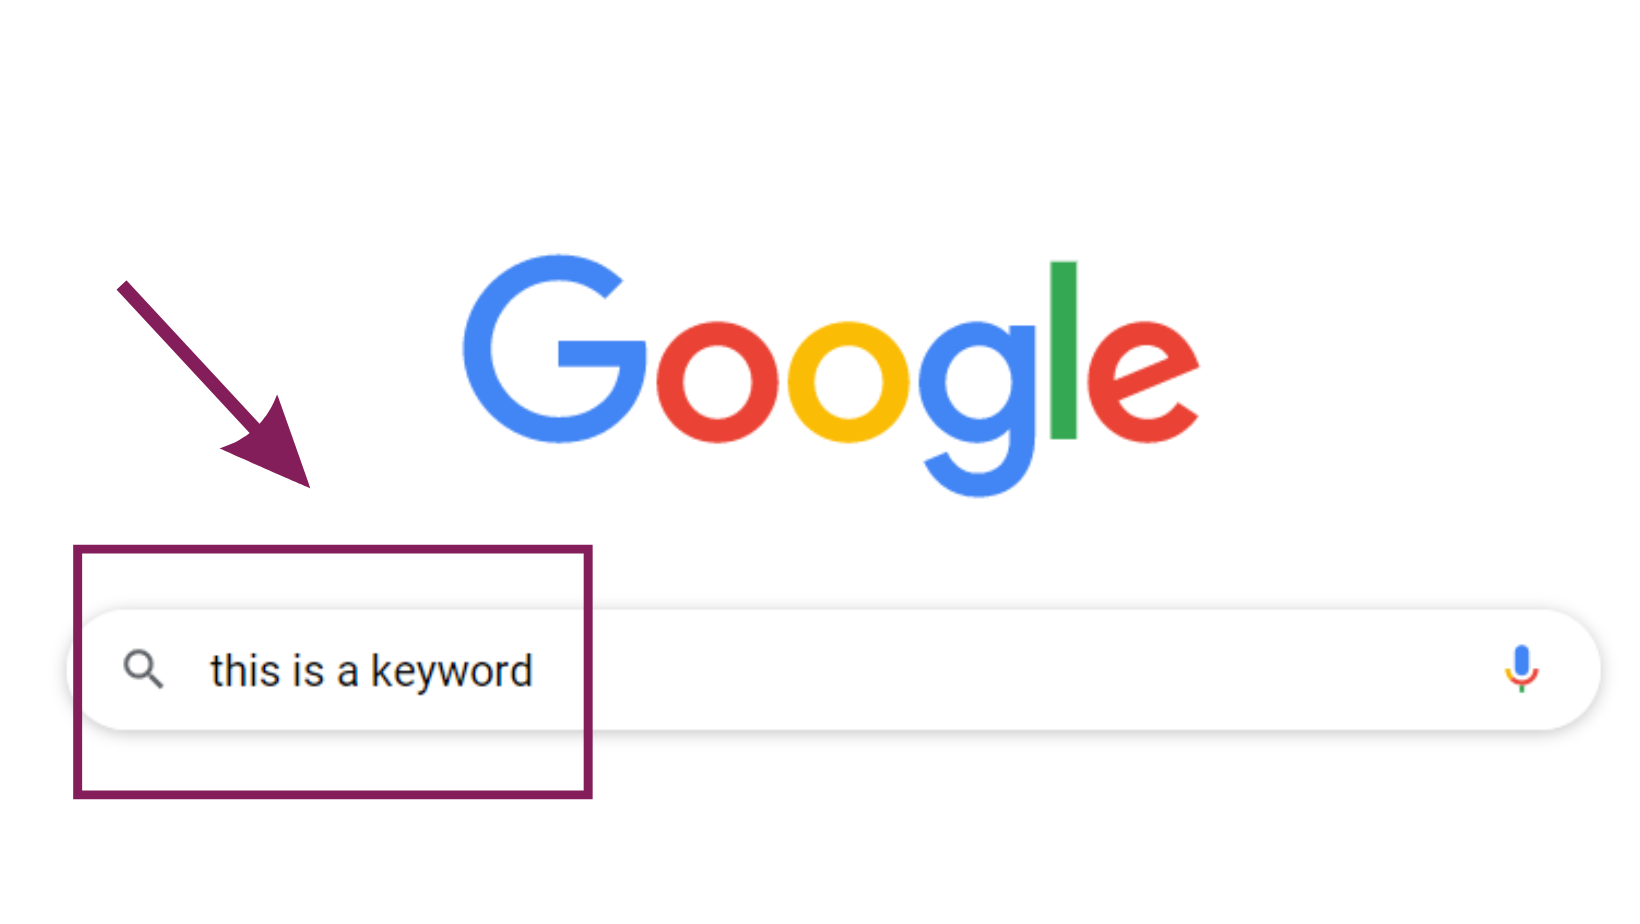 an image explaining what a keyword is by showing the searching bar of Google with the query 'this is a keyword'